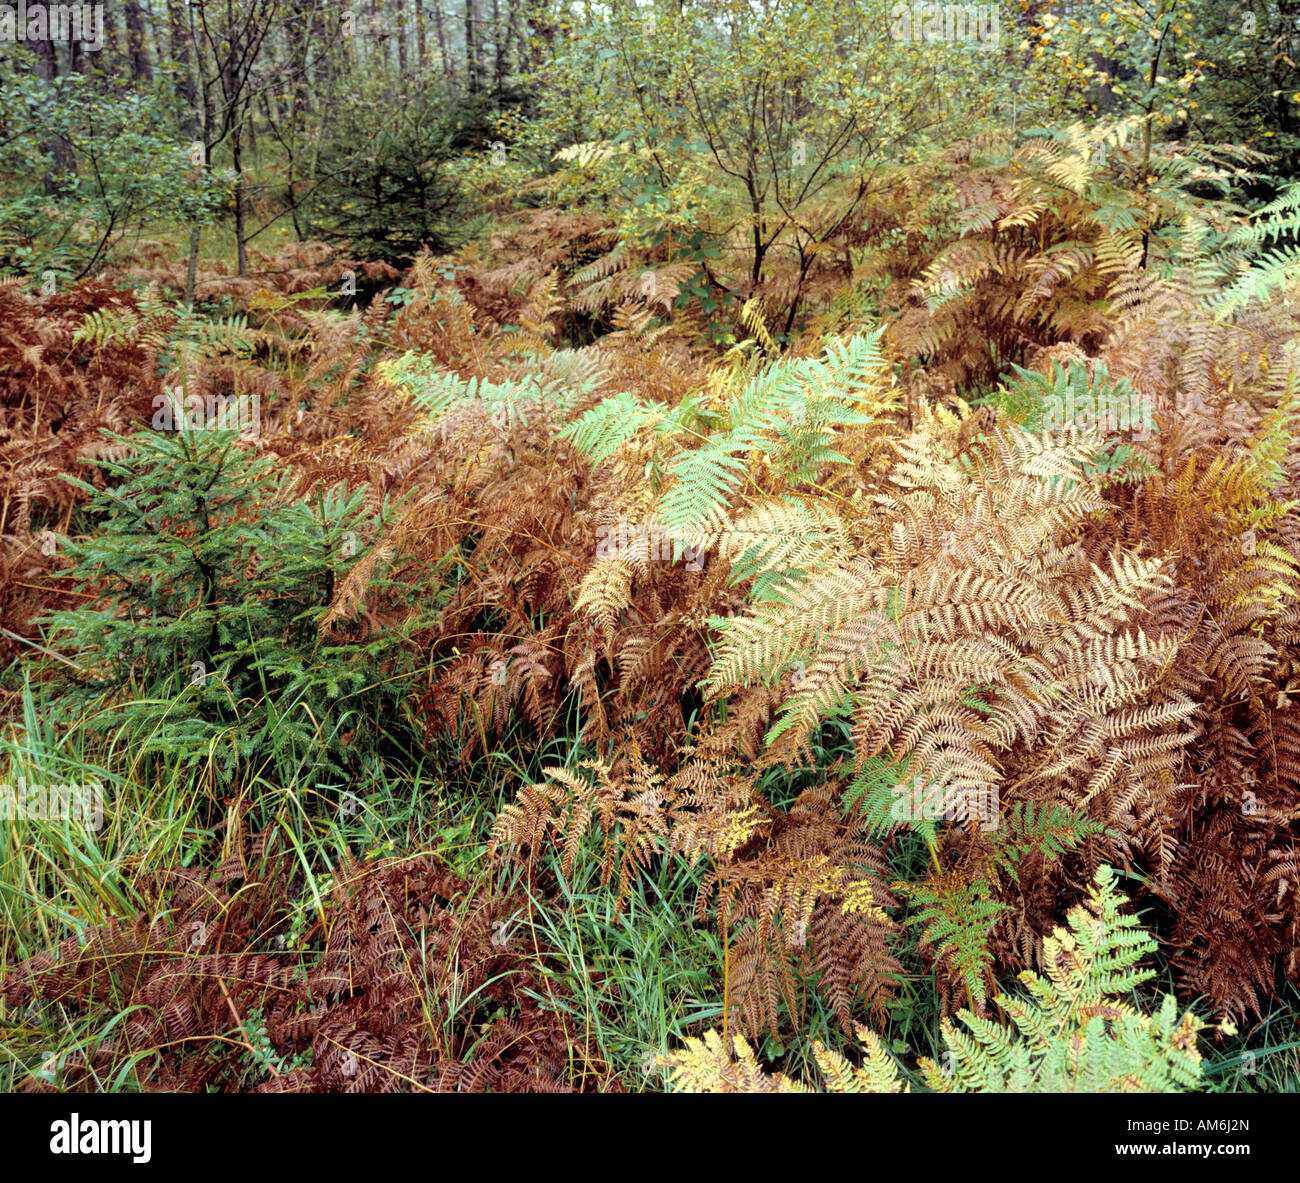 Ferns, autumnal forest soil Stock Photo